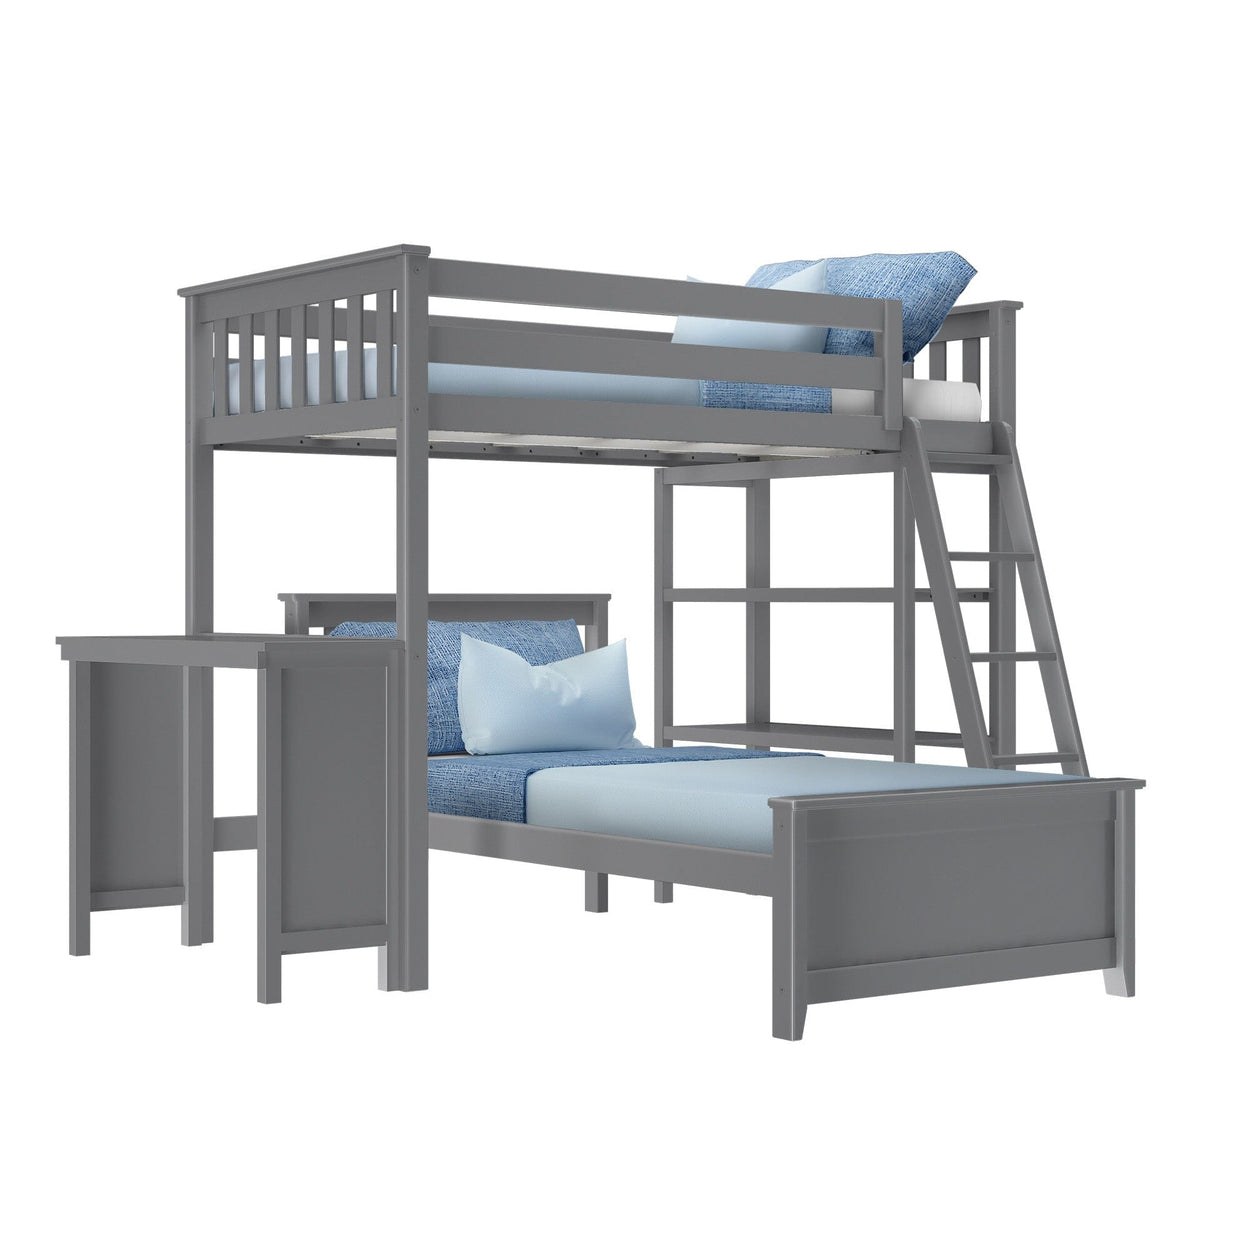 18-901-121 : Bunk Beds L-Shaped Twin over Twin Bunk Bed with Bookcase and Desk, Grey